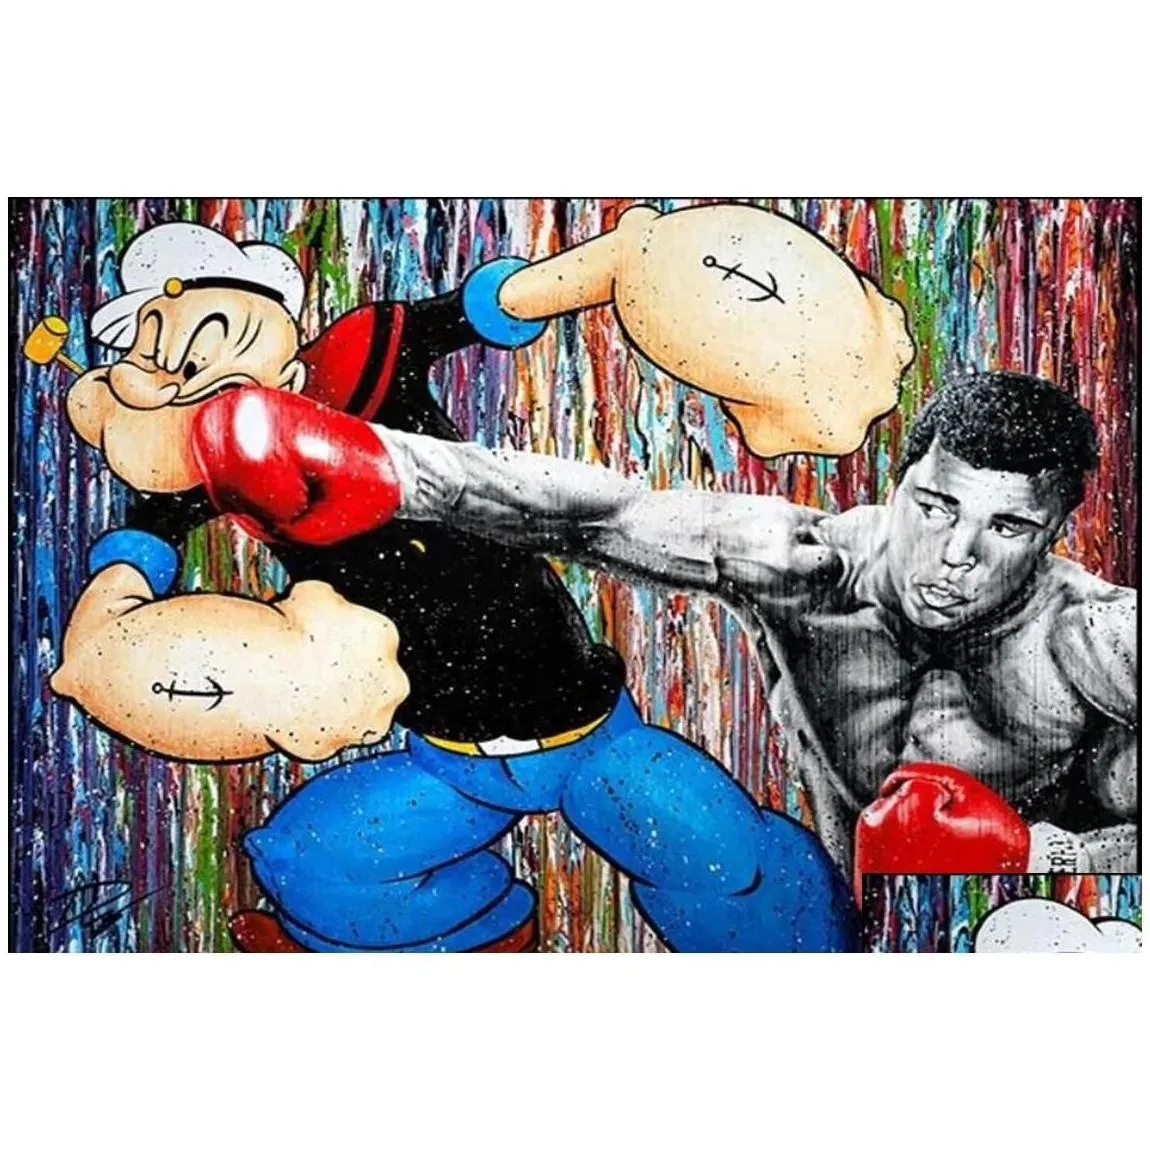 paintings modern graffiti art boxing match decoration hd quality garten kids children room picture poster canvas painting drop deliv